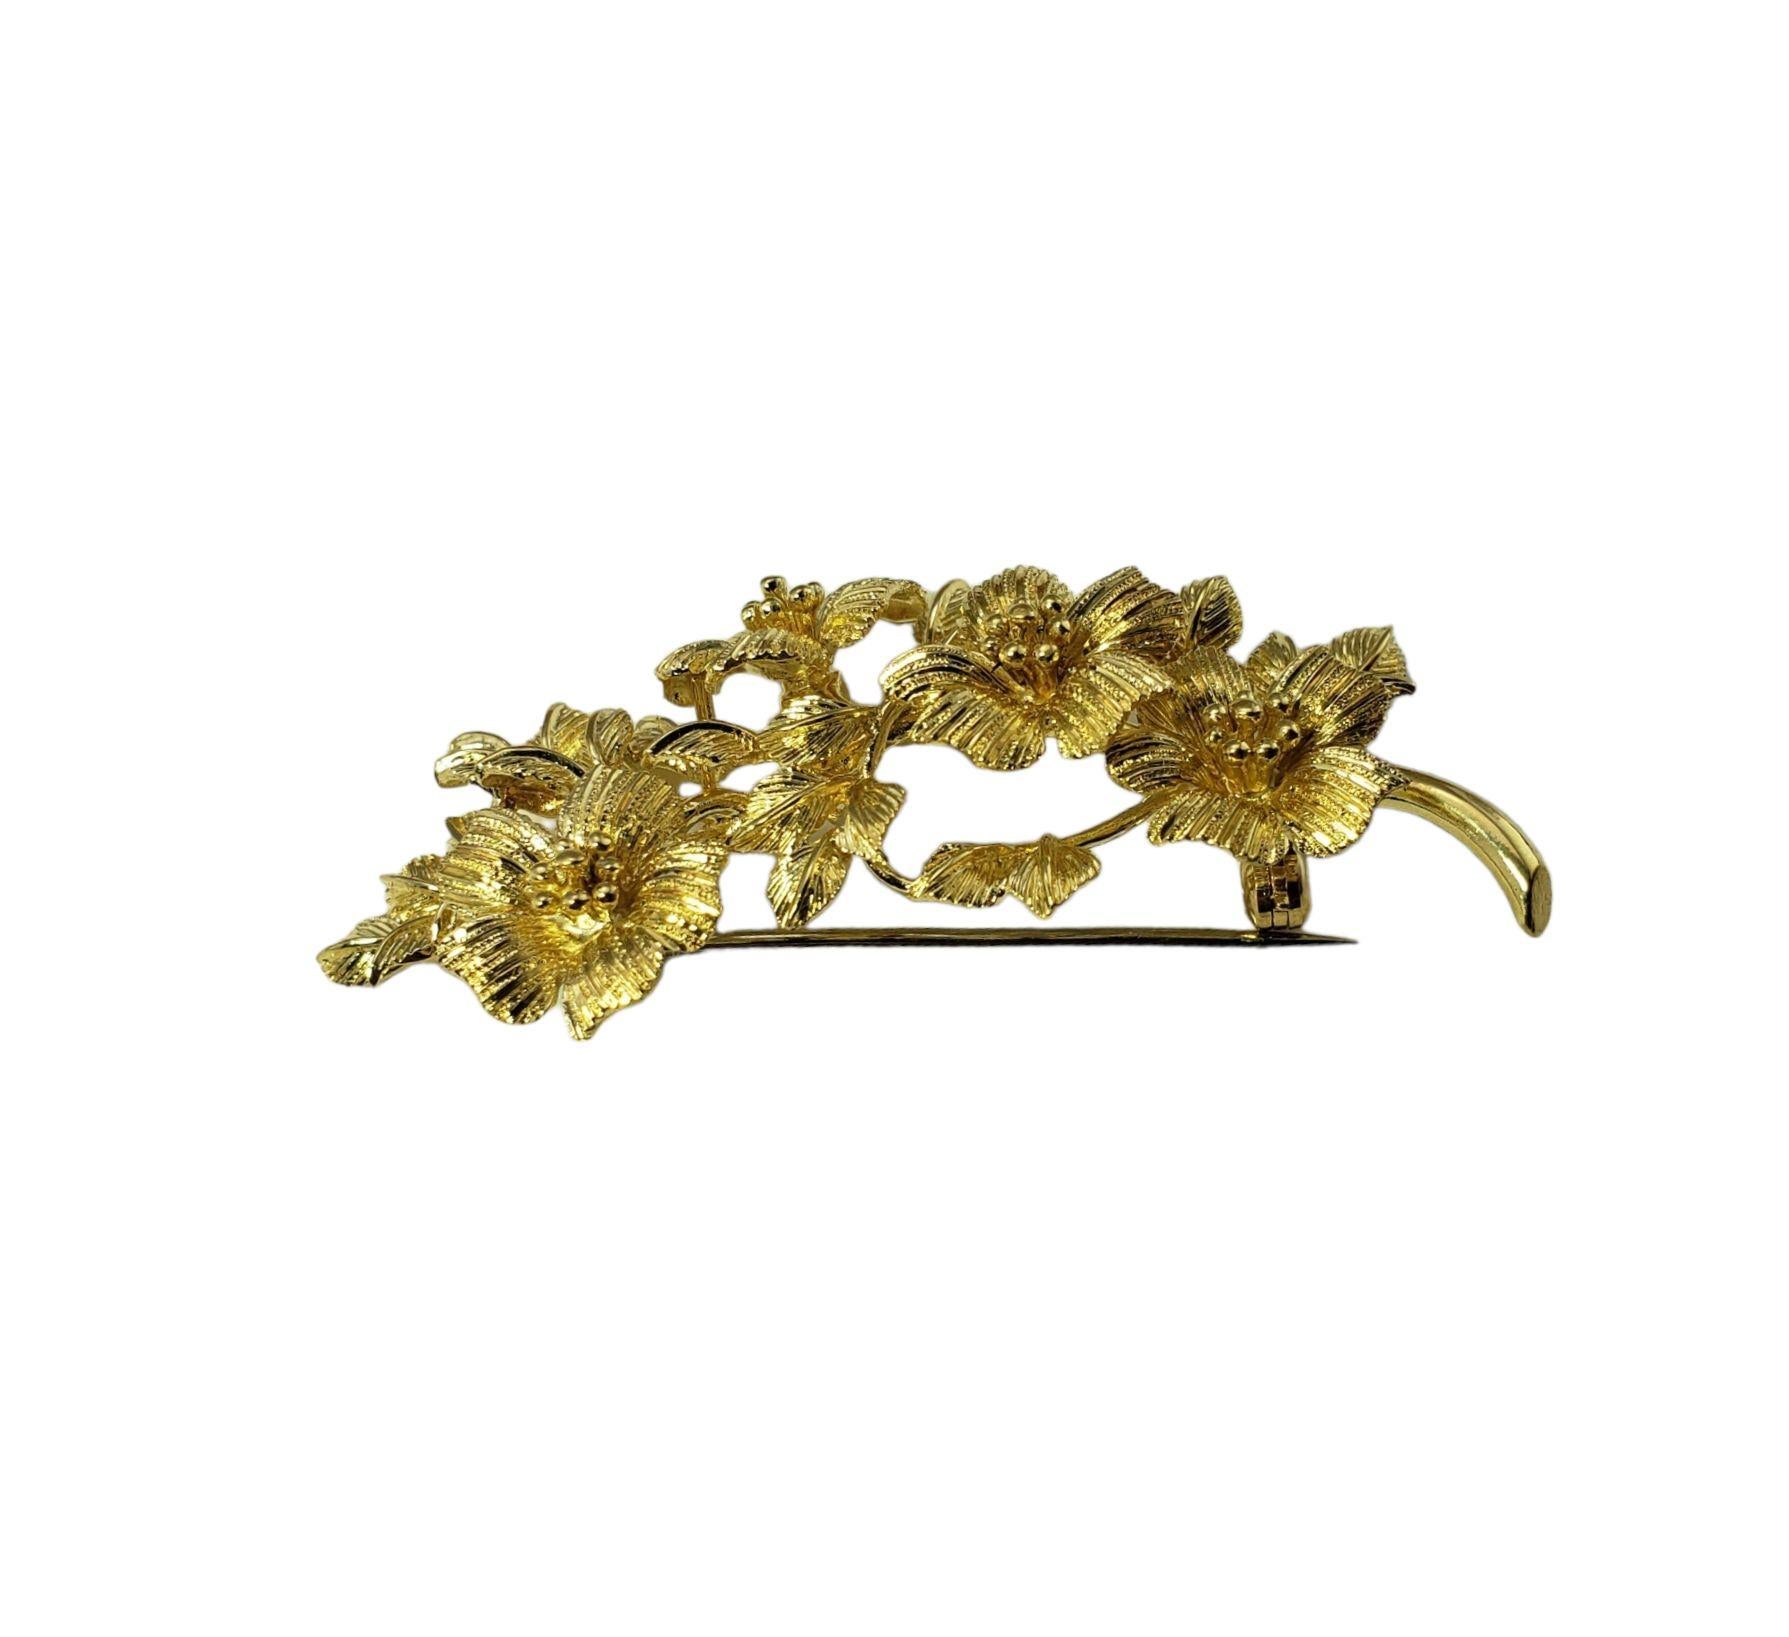 Vintage Tiffany & Co. 18 Karat Yellow Gold Floral Brooch/Pin-

This stunning 18K yellow gold brooch by Tiffany & Co. is meticulously detailed in a lovely floral design.

Size: 59 mm x 36 mm

Weight: 10.9 dwt. / 17.0gr.

Stamped: Tiffany & Co